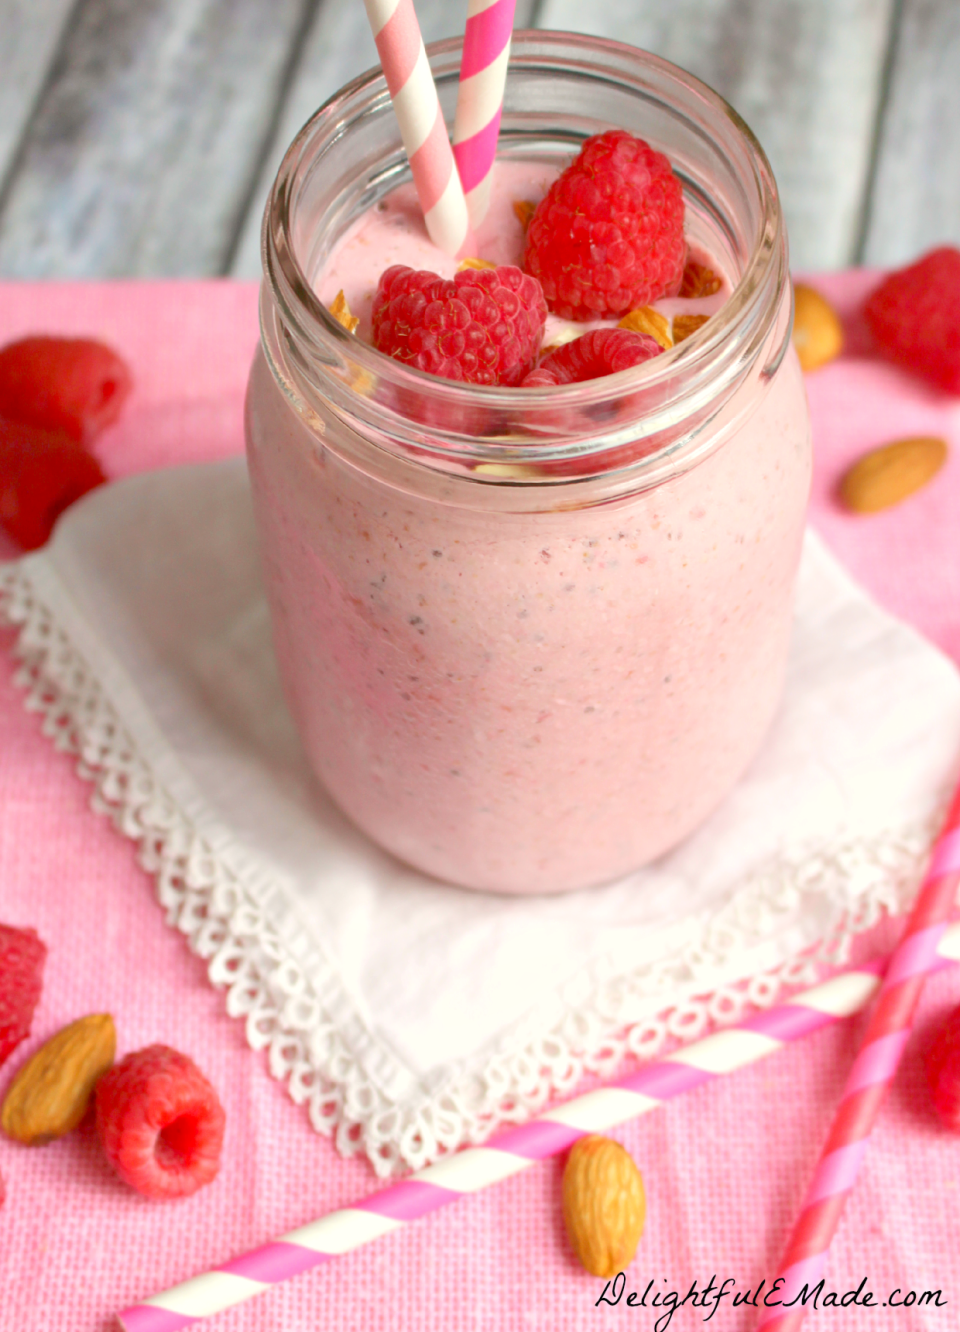 Raspberry Almond Chia Smoothie from Delightful E Made